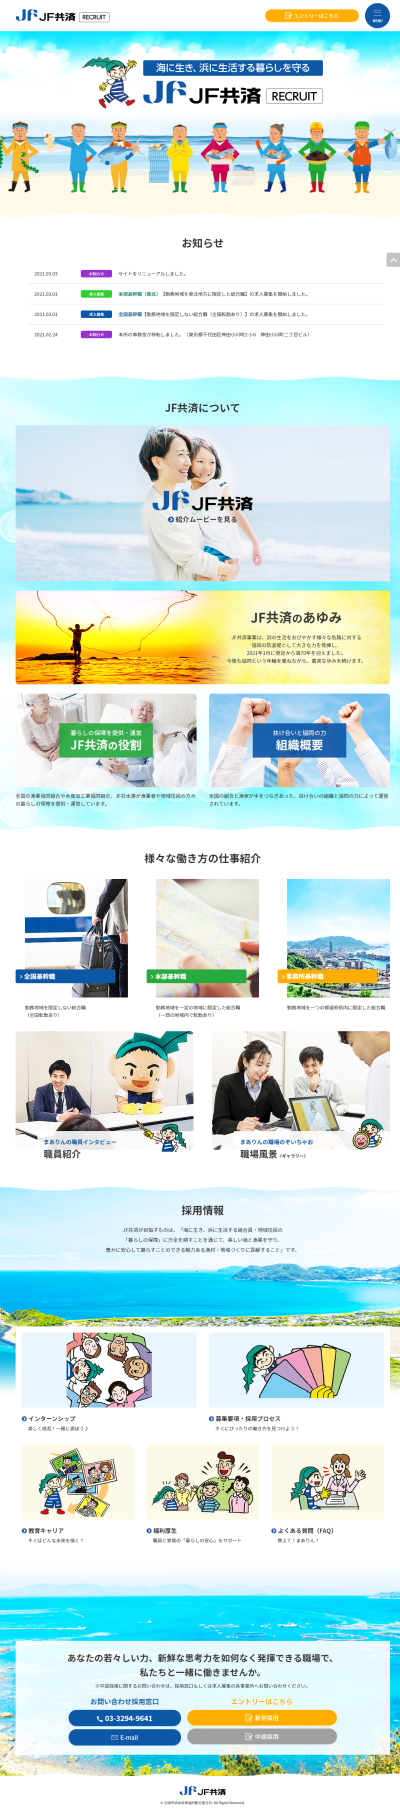 JF共水連採用サイト